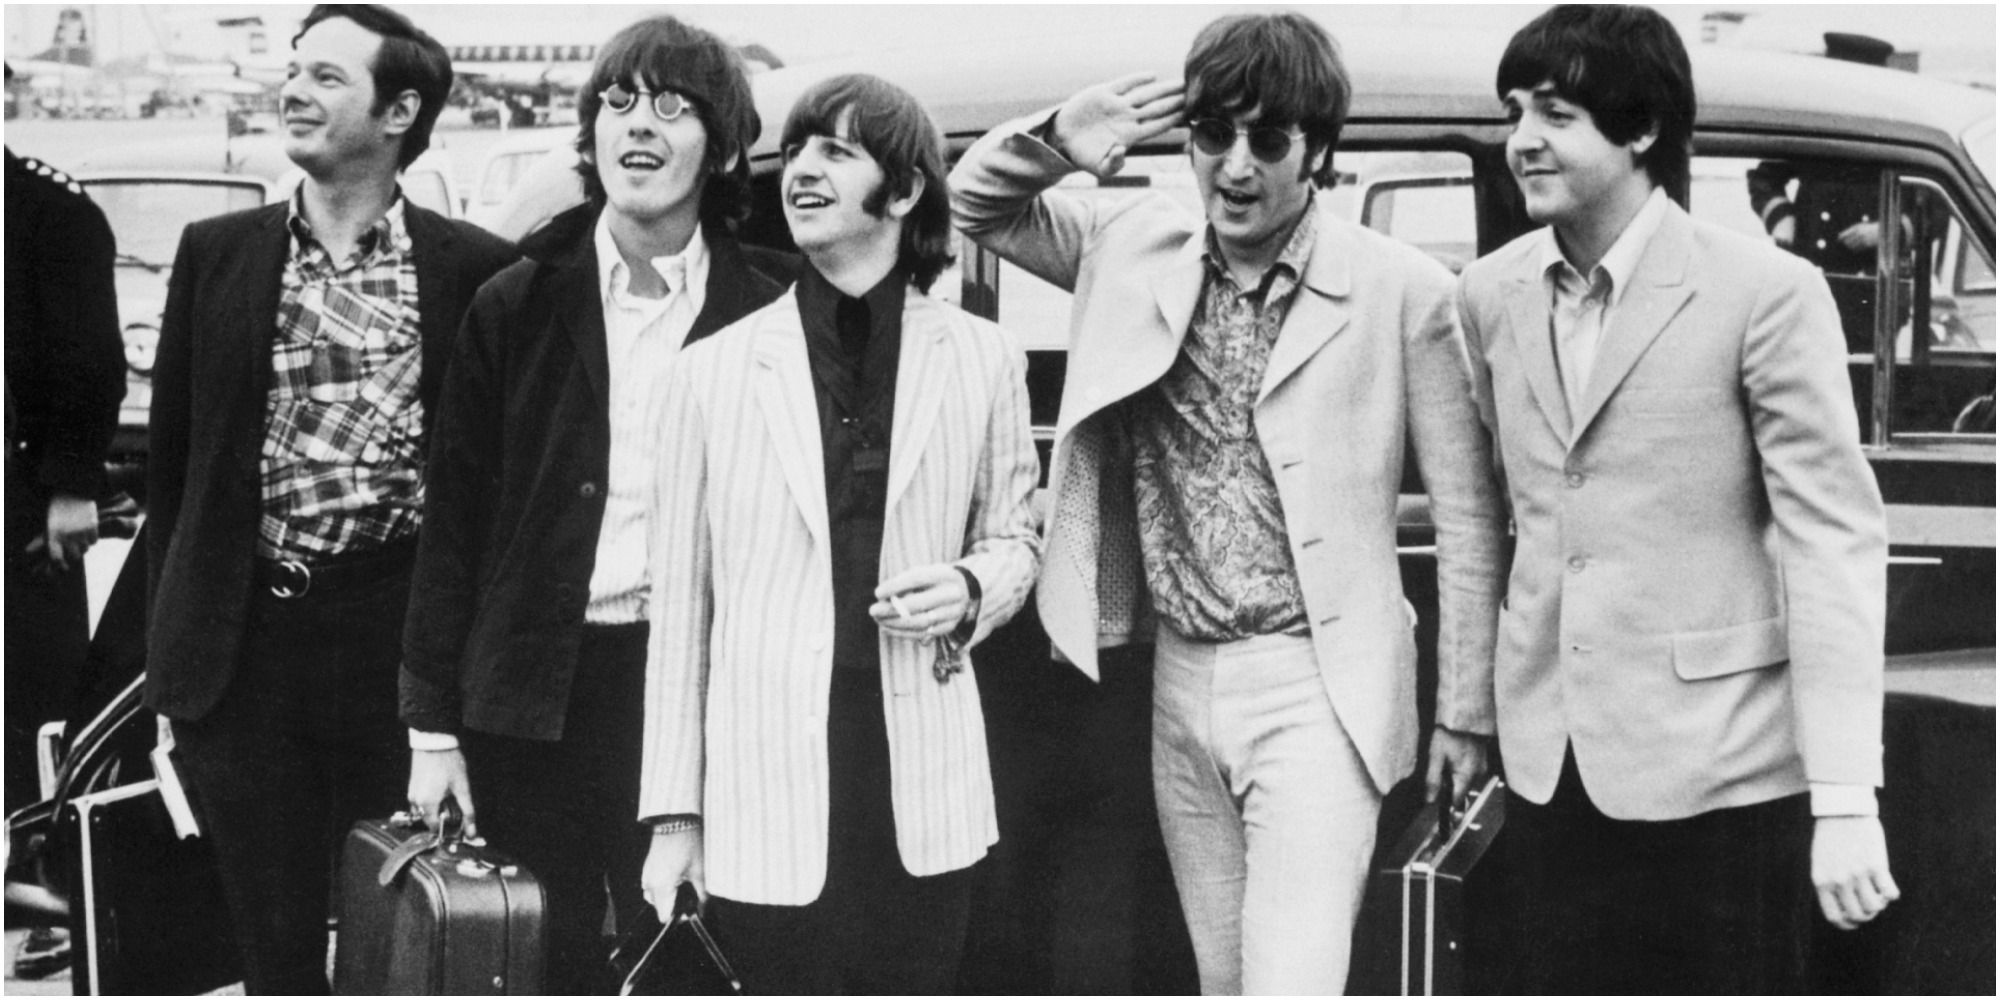 Brian Epstein and The Beatles photographed on the tarmac.